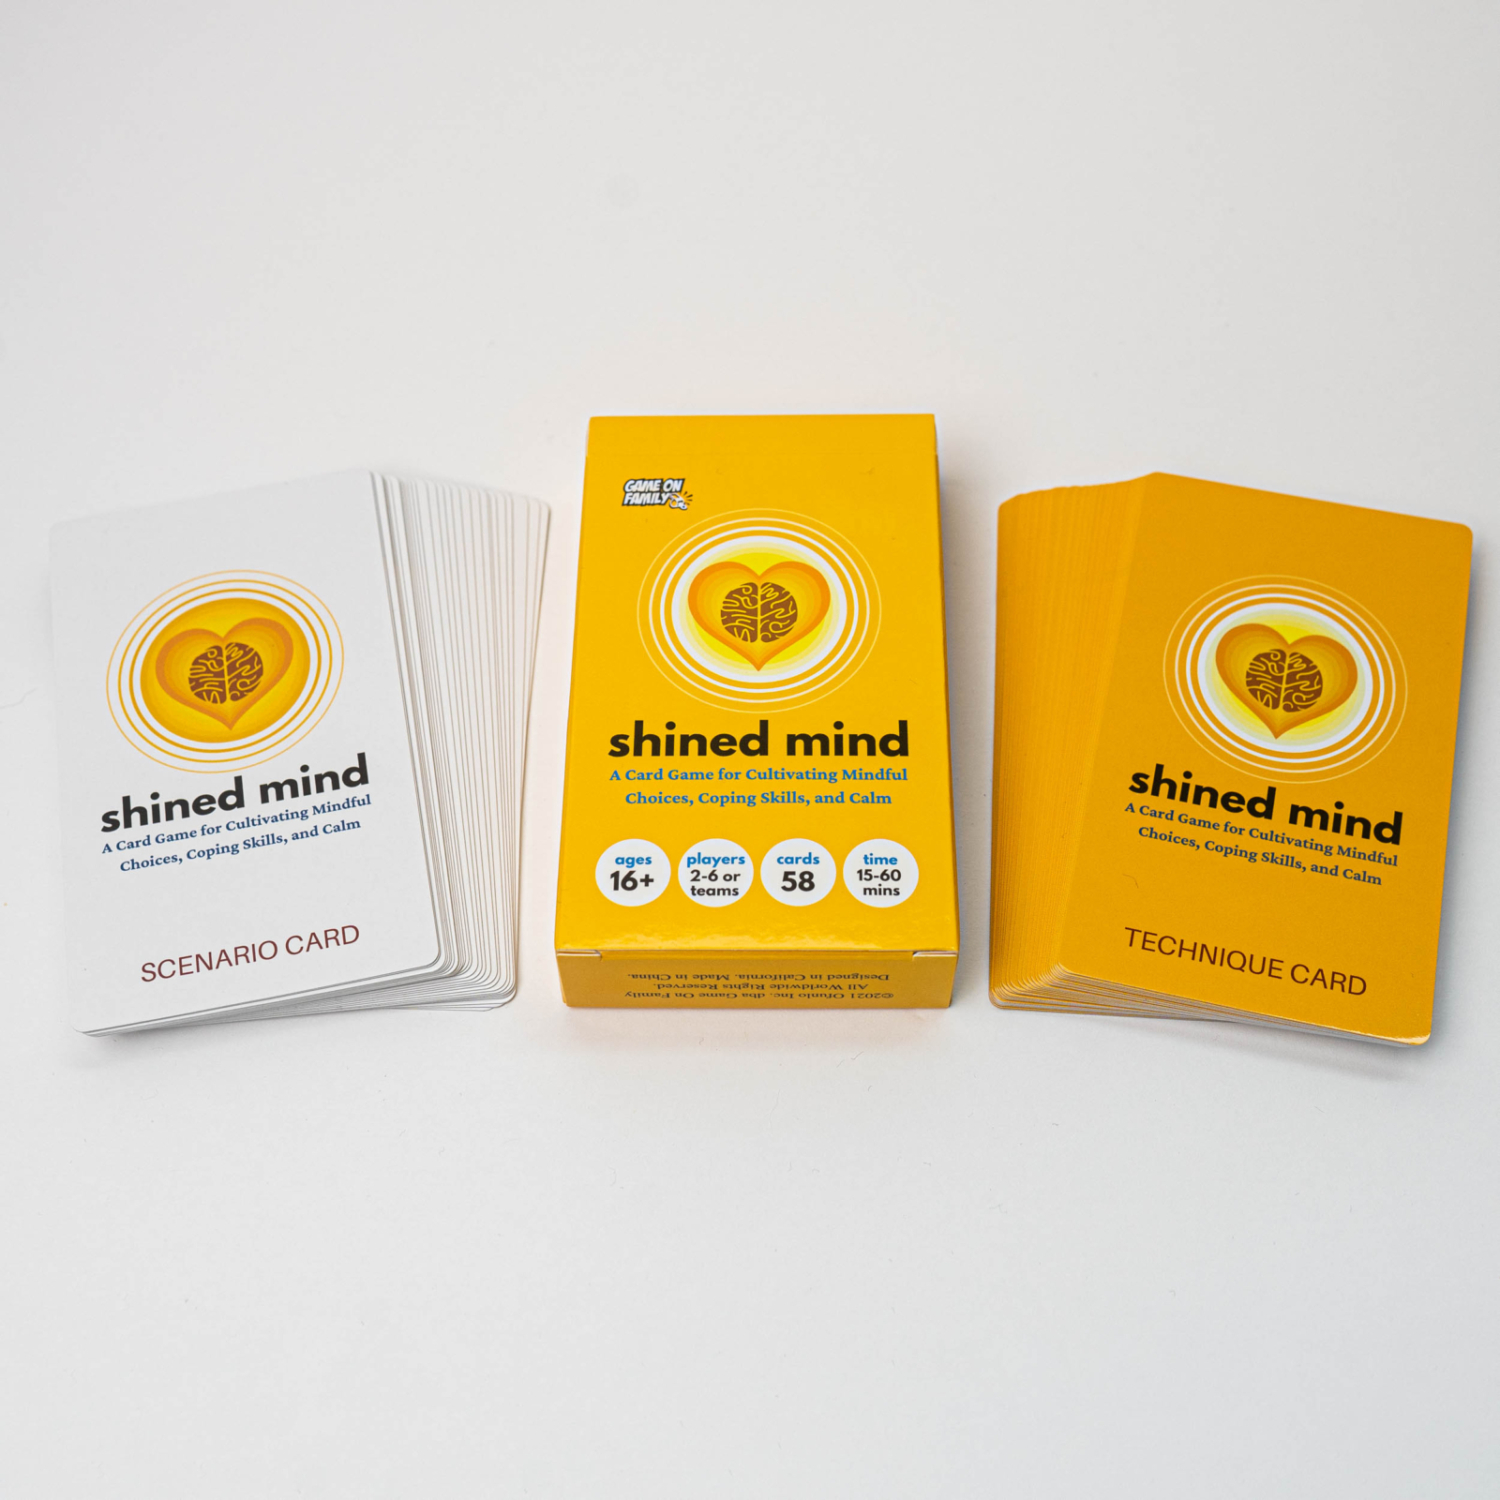 Shined Mind A Card Game for Cultivating Mindful Choices, Coping Skills, and Calm